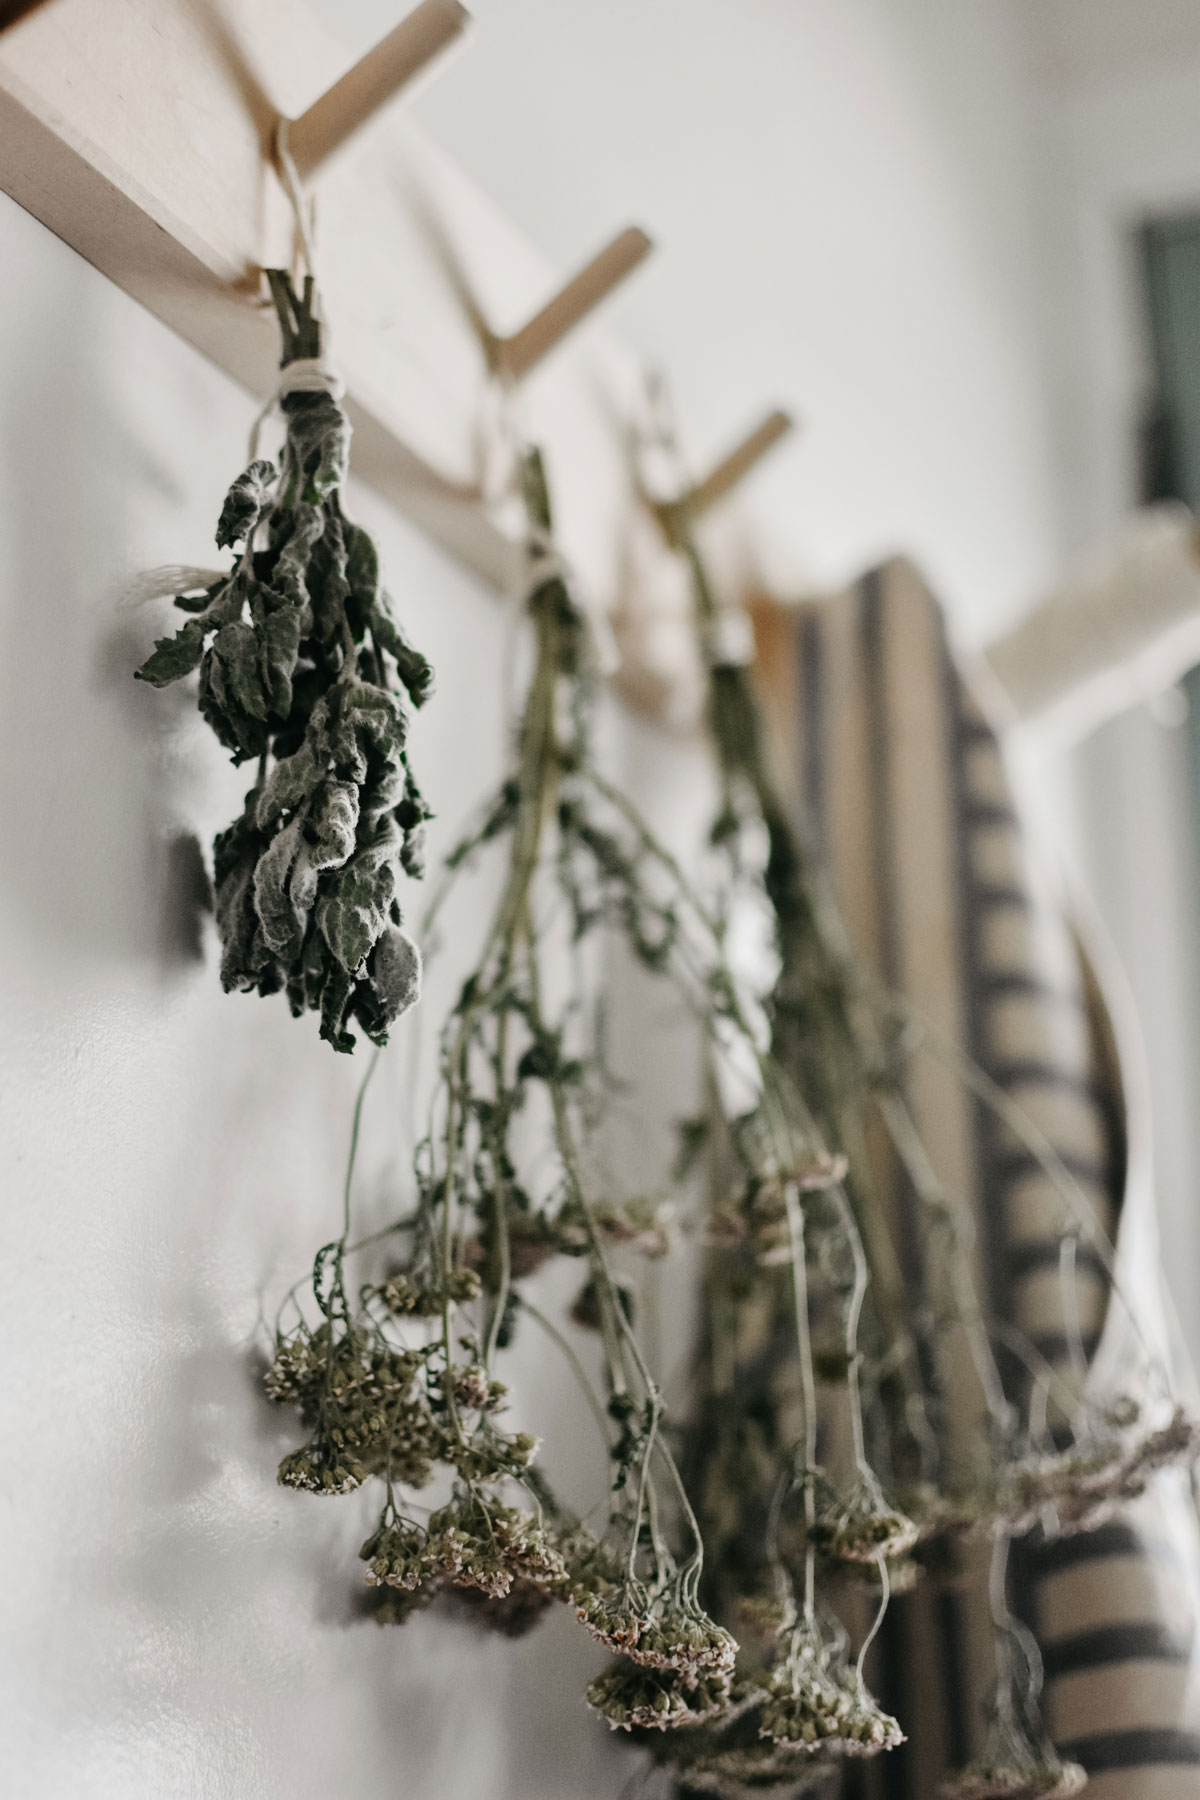 Herbs hanging on a coat rack to dry